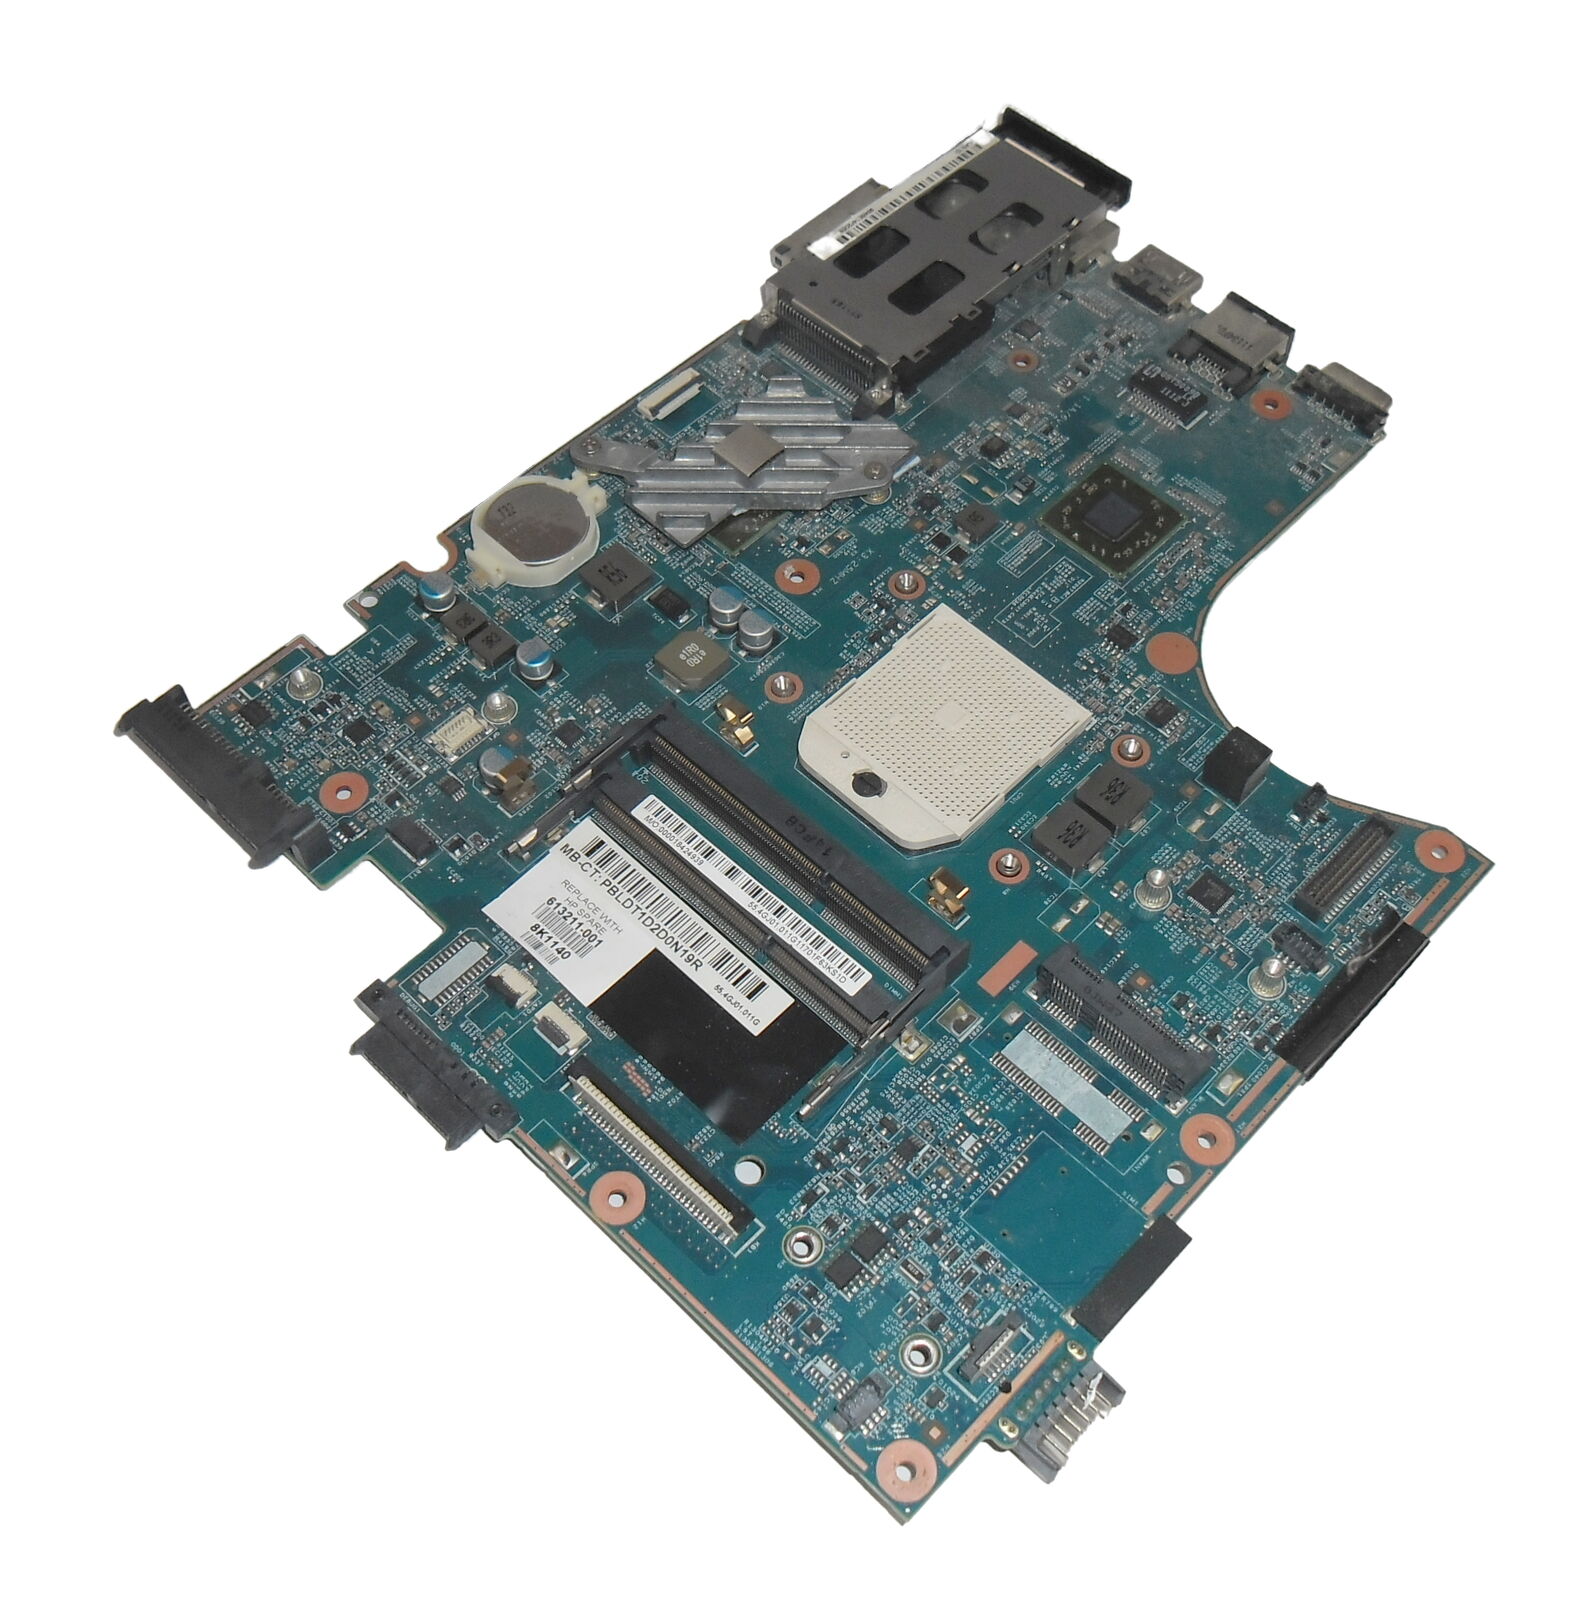 HP ProBook 4525s Laptop Motherboard - 613211-001/616647-001 Brand - HP All items are fully tested and worki